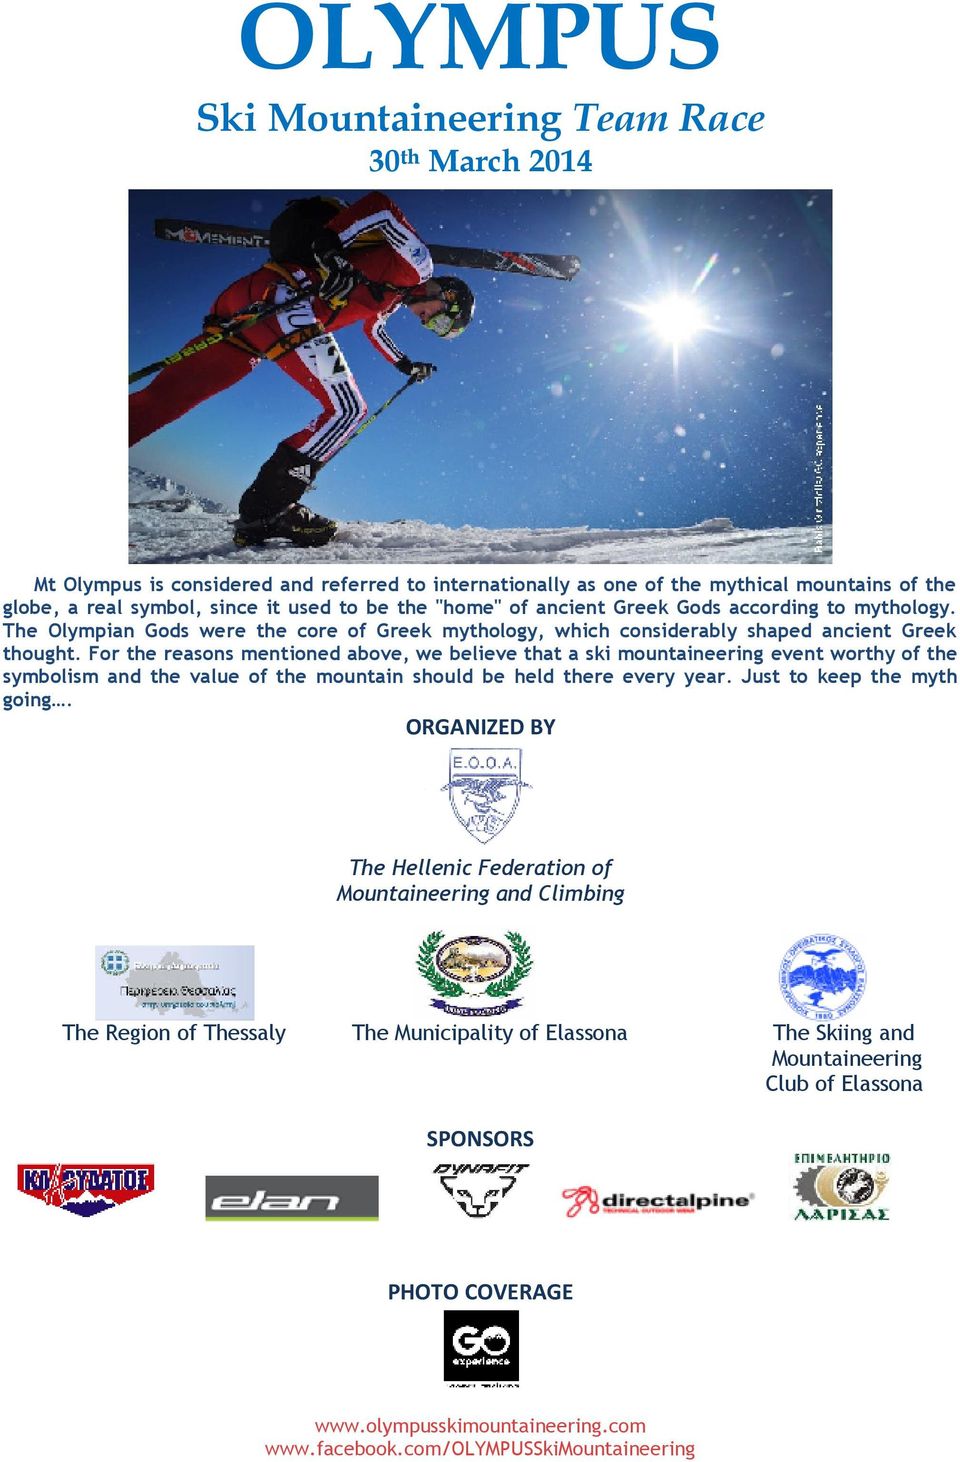 For the reasons mentioned above, we believe that a ski mountaineering event worthy of the symbolism and the value of the mountain should be held there every year. Just to keep the myth going.